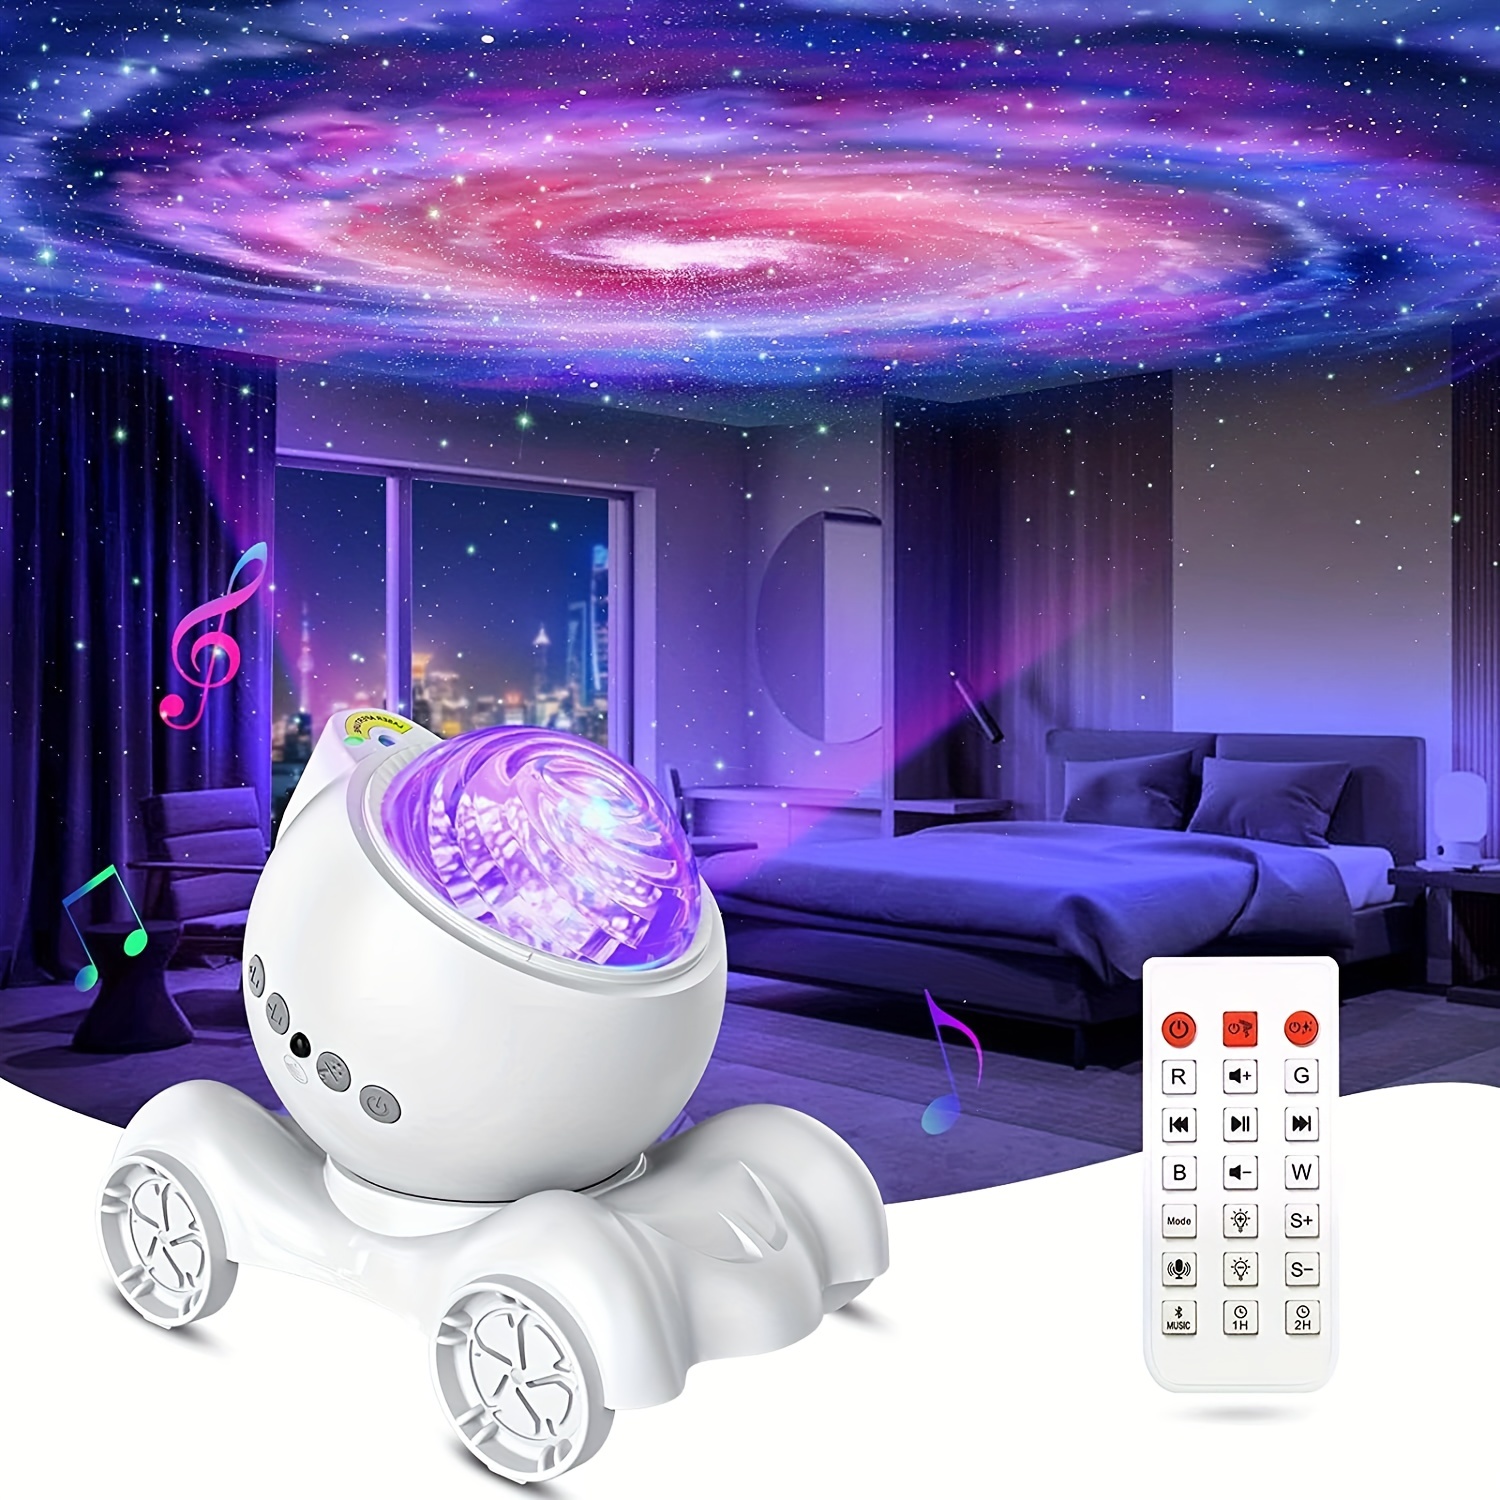 Led Starry Sky Projector, Moonfrow Galaxy Projector Light, Night Light  Projector With Soothing Aurora Effects, White Noise For Sleep, Sky Projector  Wi